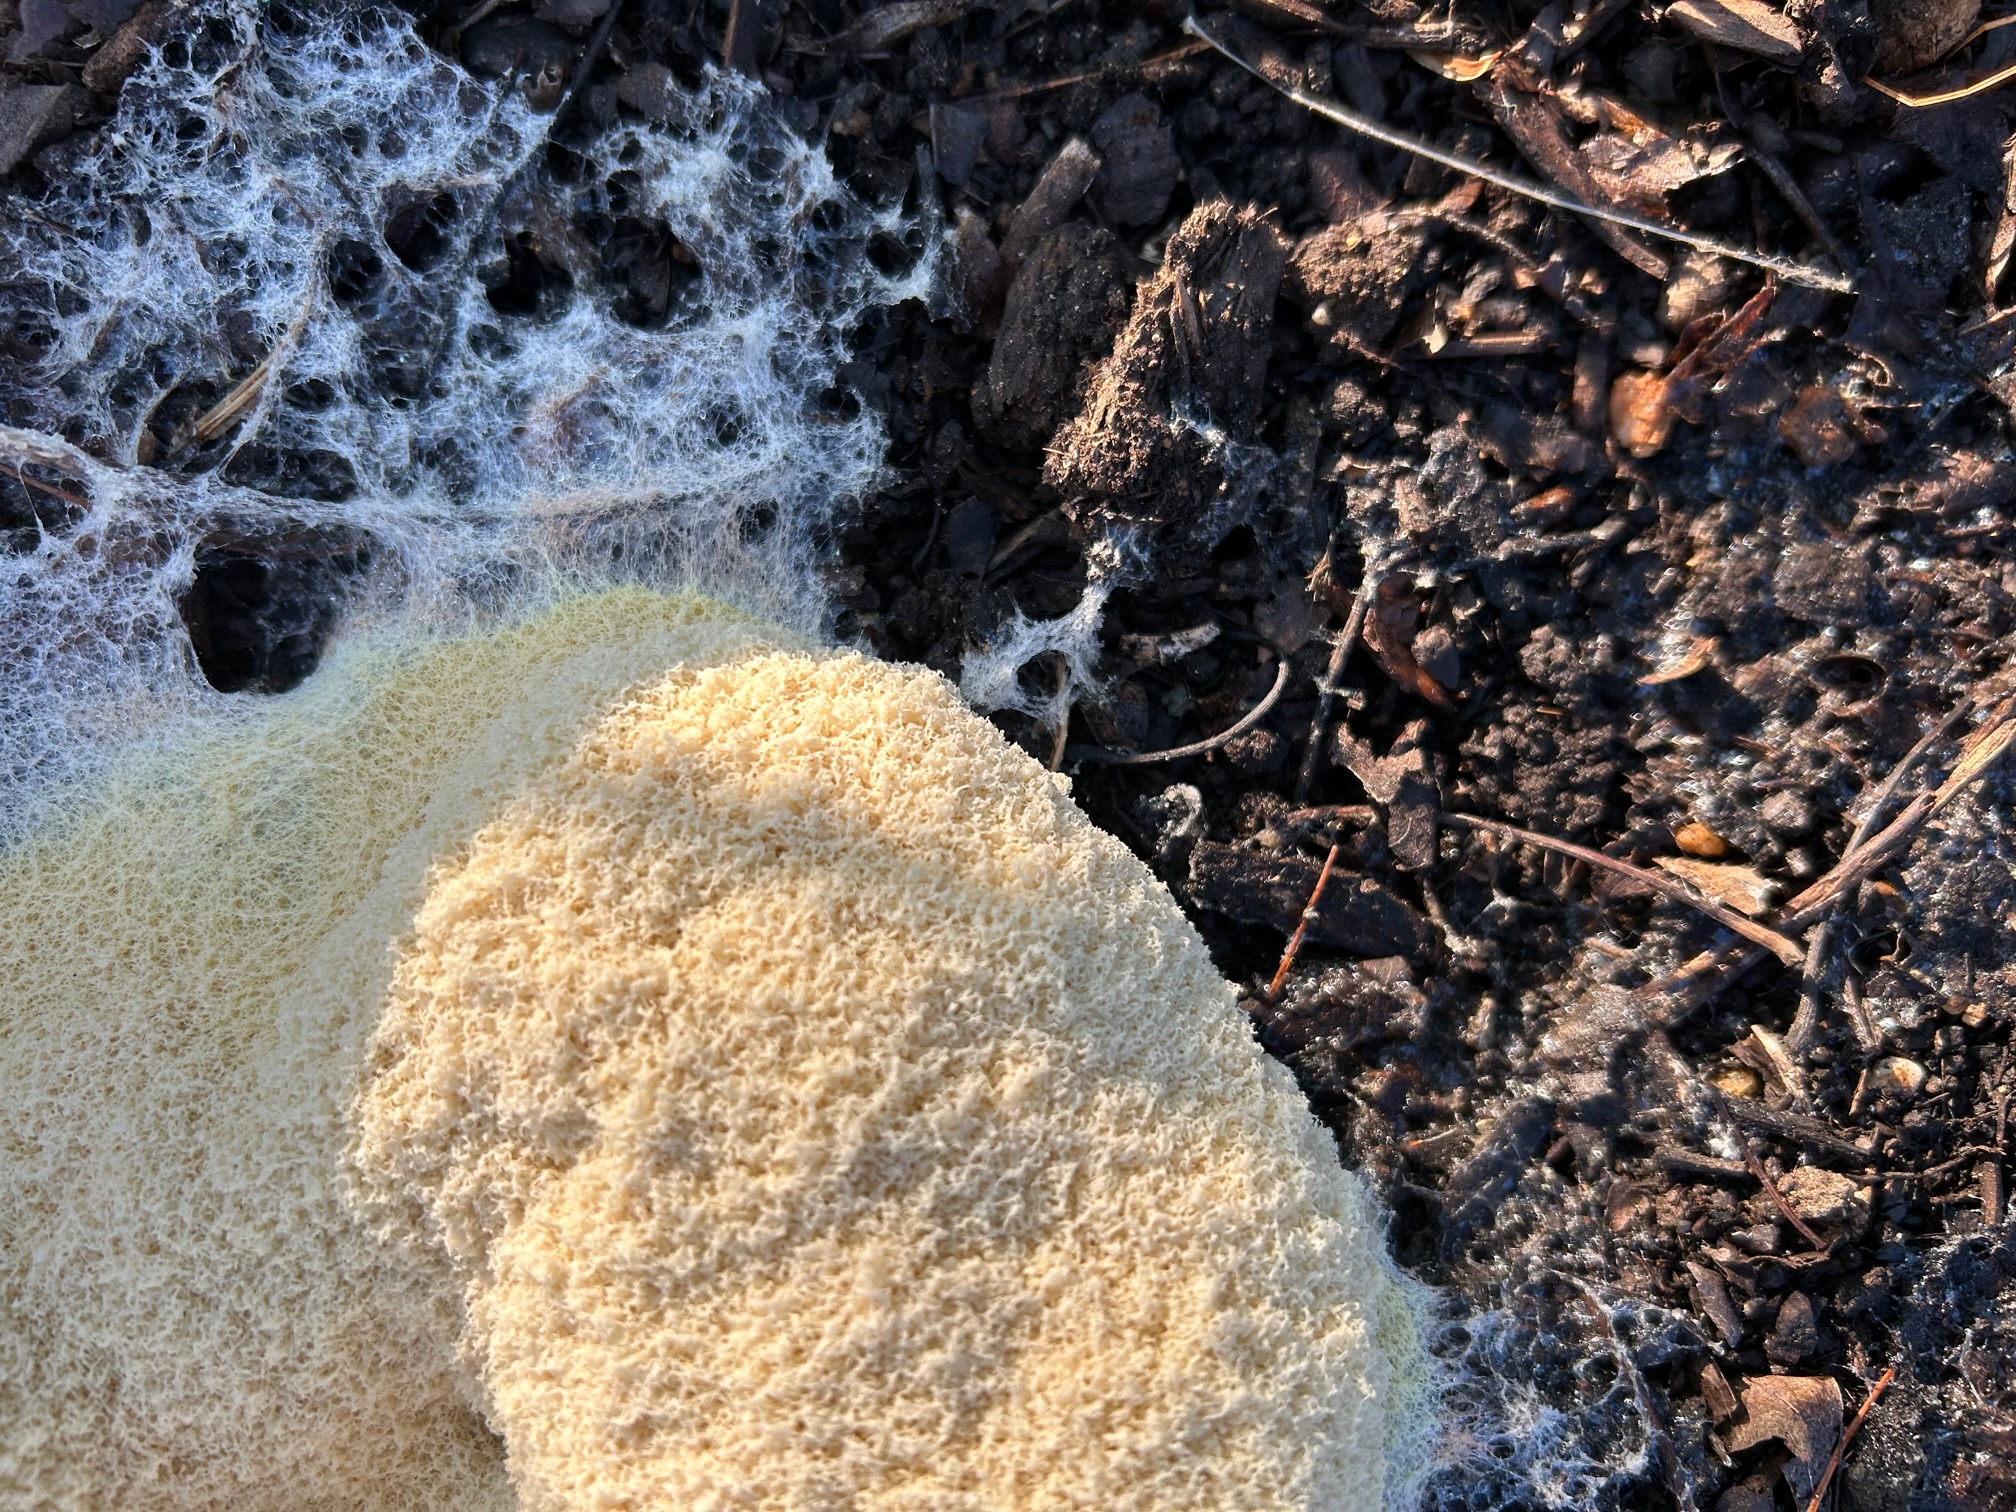 identification - What is this white foam under my tree? - Gardening &  Landscaping Stack Exchange